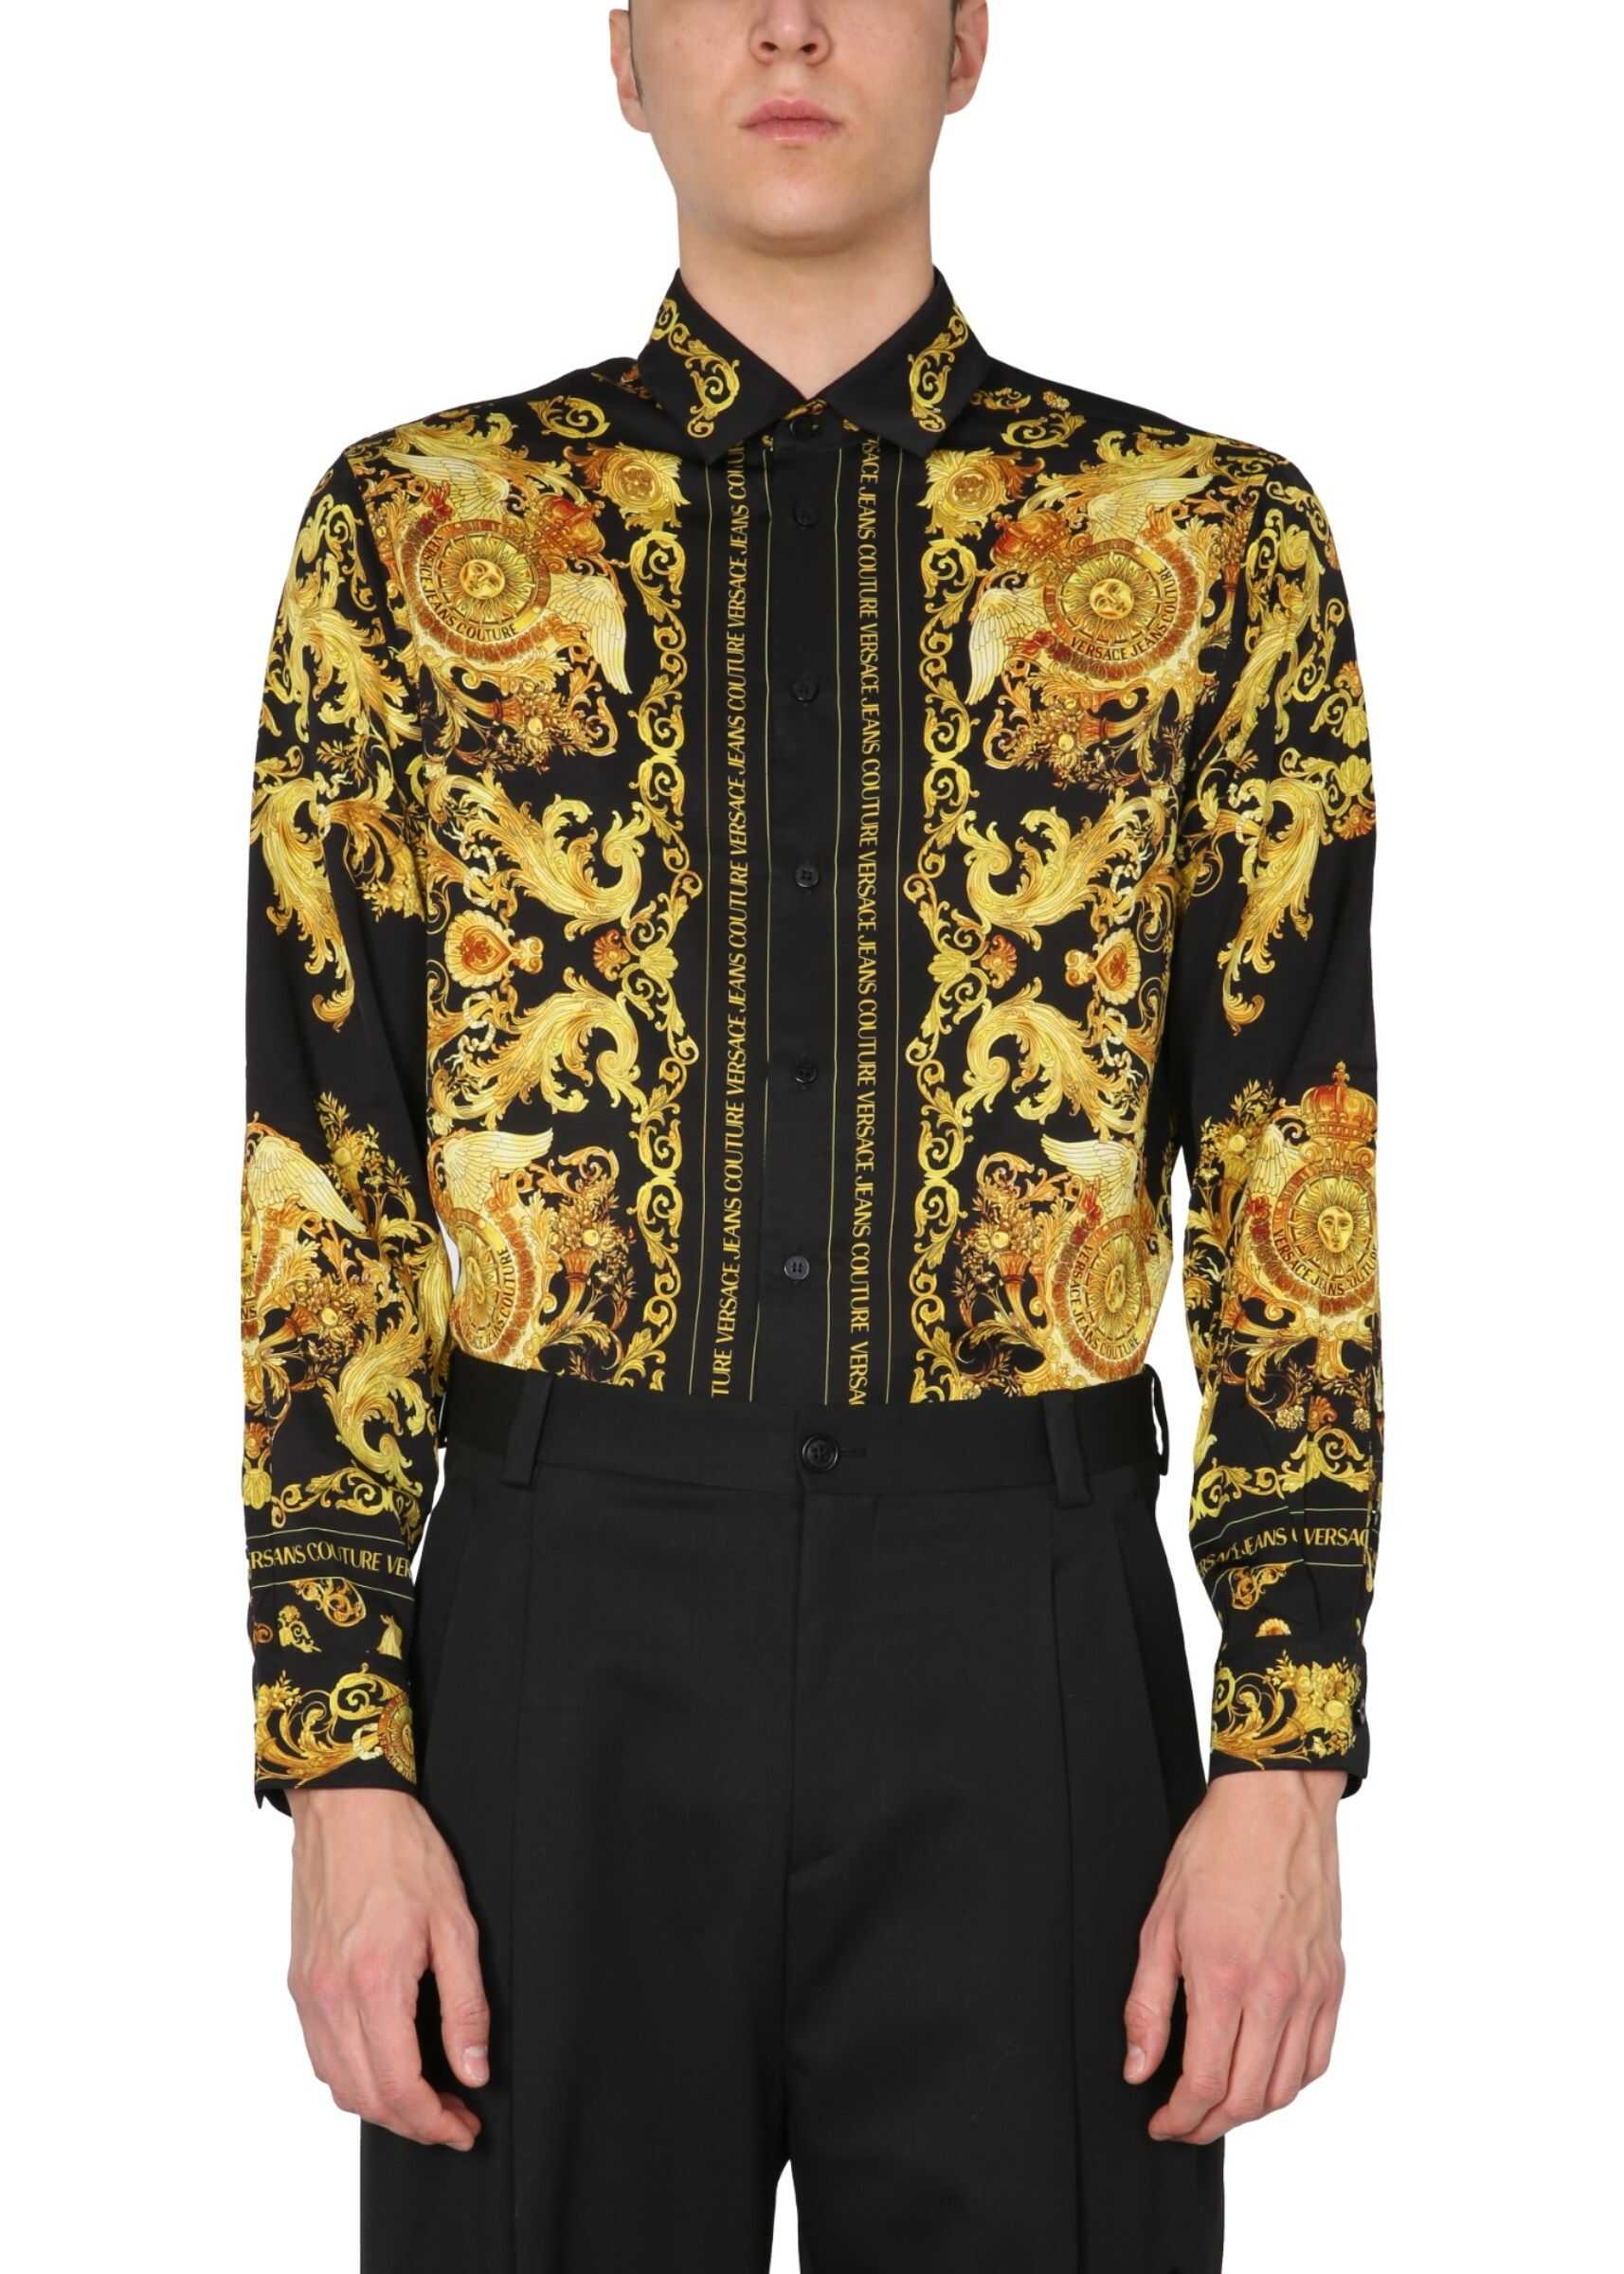 Versace Jeans Couture Shirt With A Mix Of Baroque And Rococo Prints B1GWA6R3_S0273899 BLACK